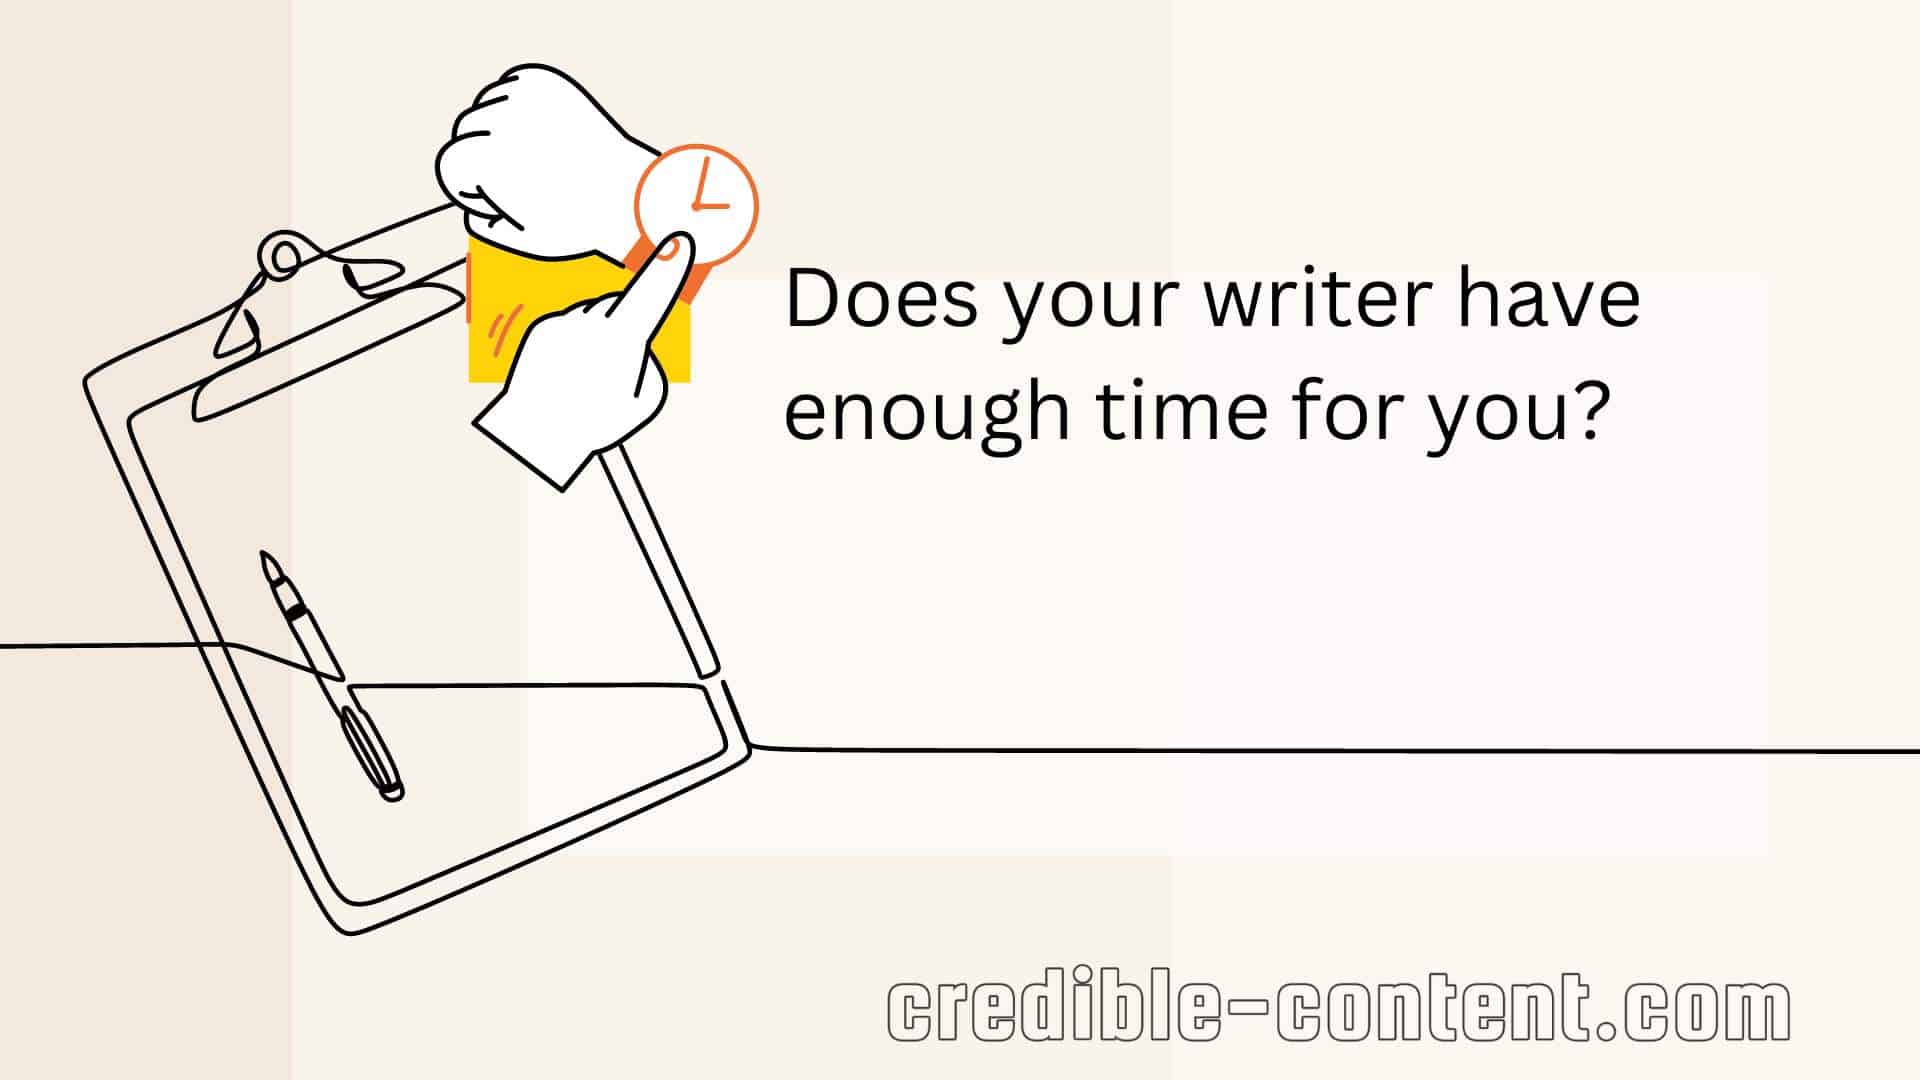 Does your writer have enough time for you